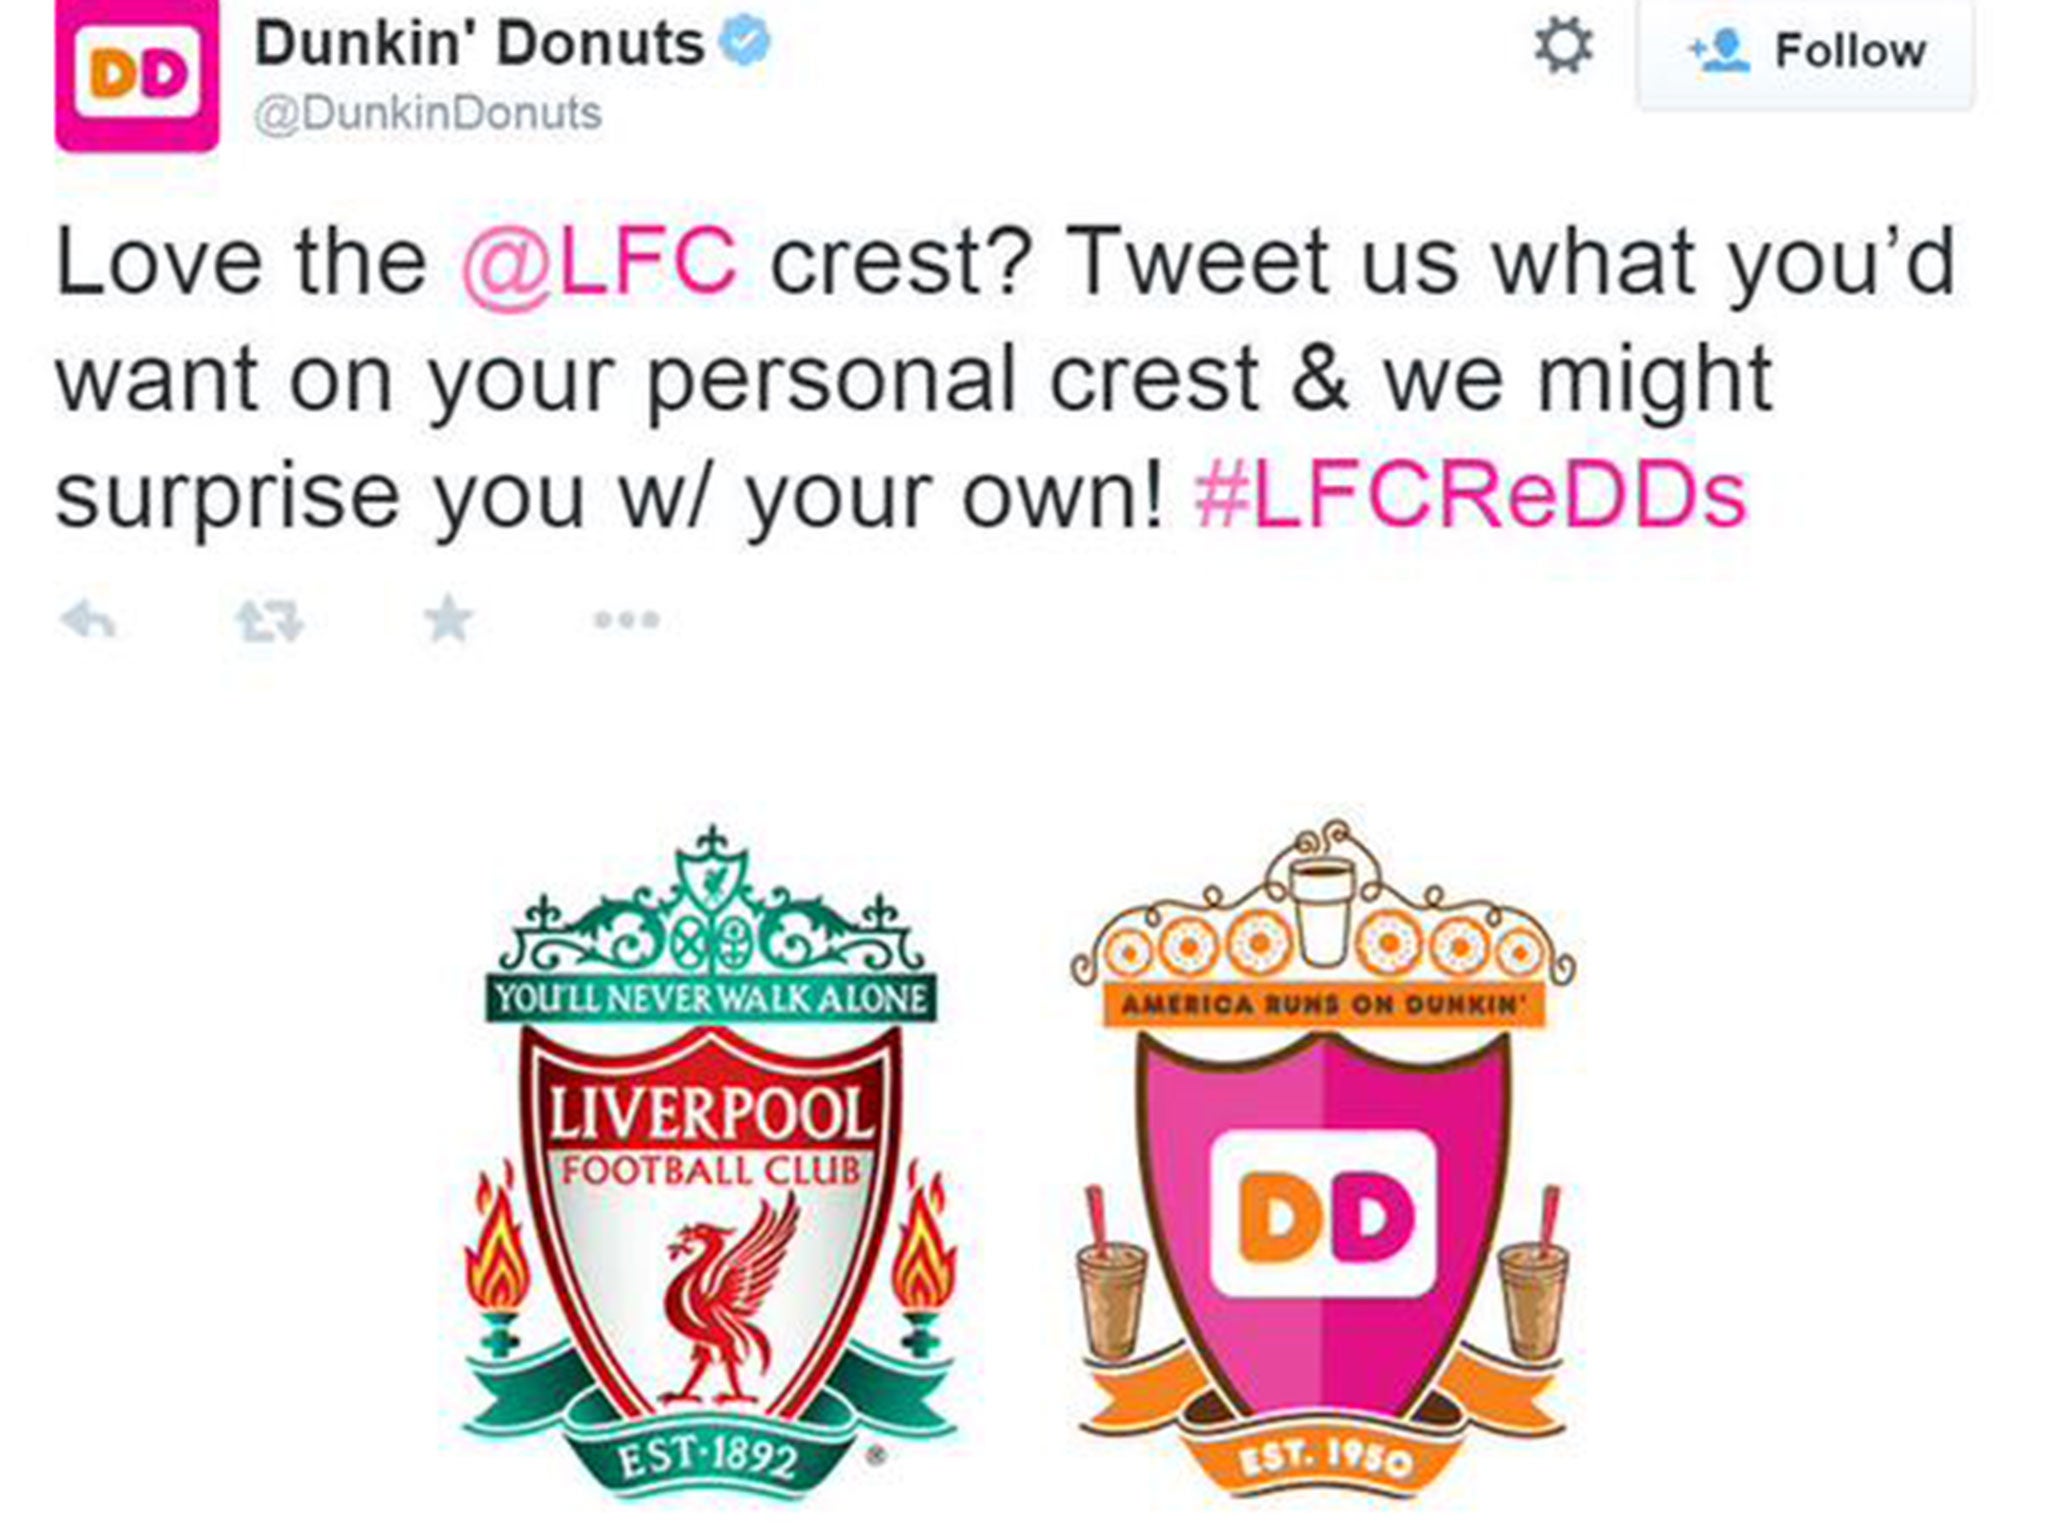 Dunkin' Donuts posted this tweet before later deleting it and apologising